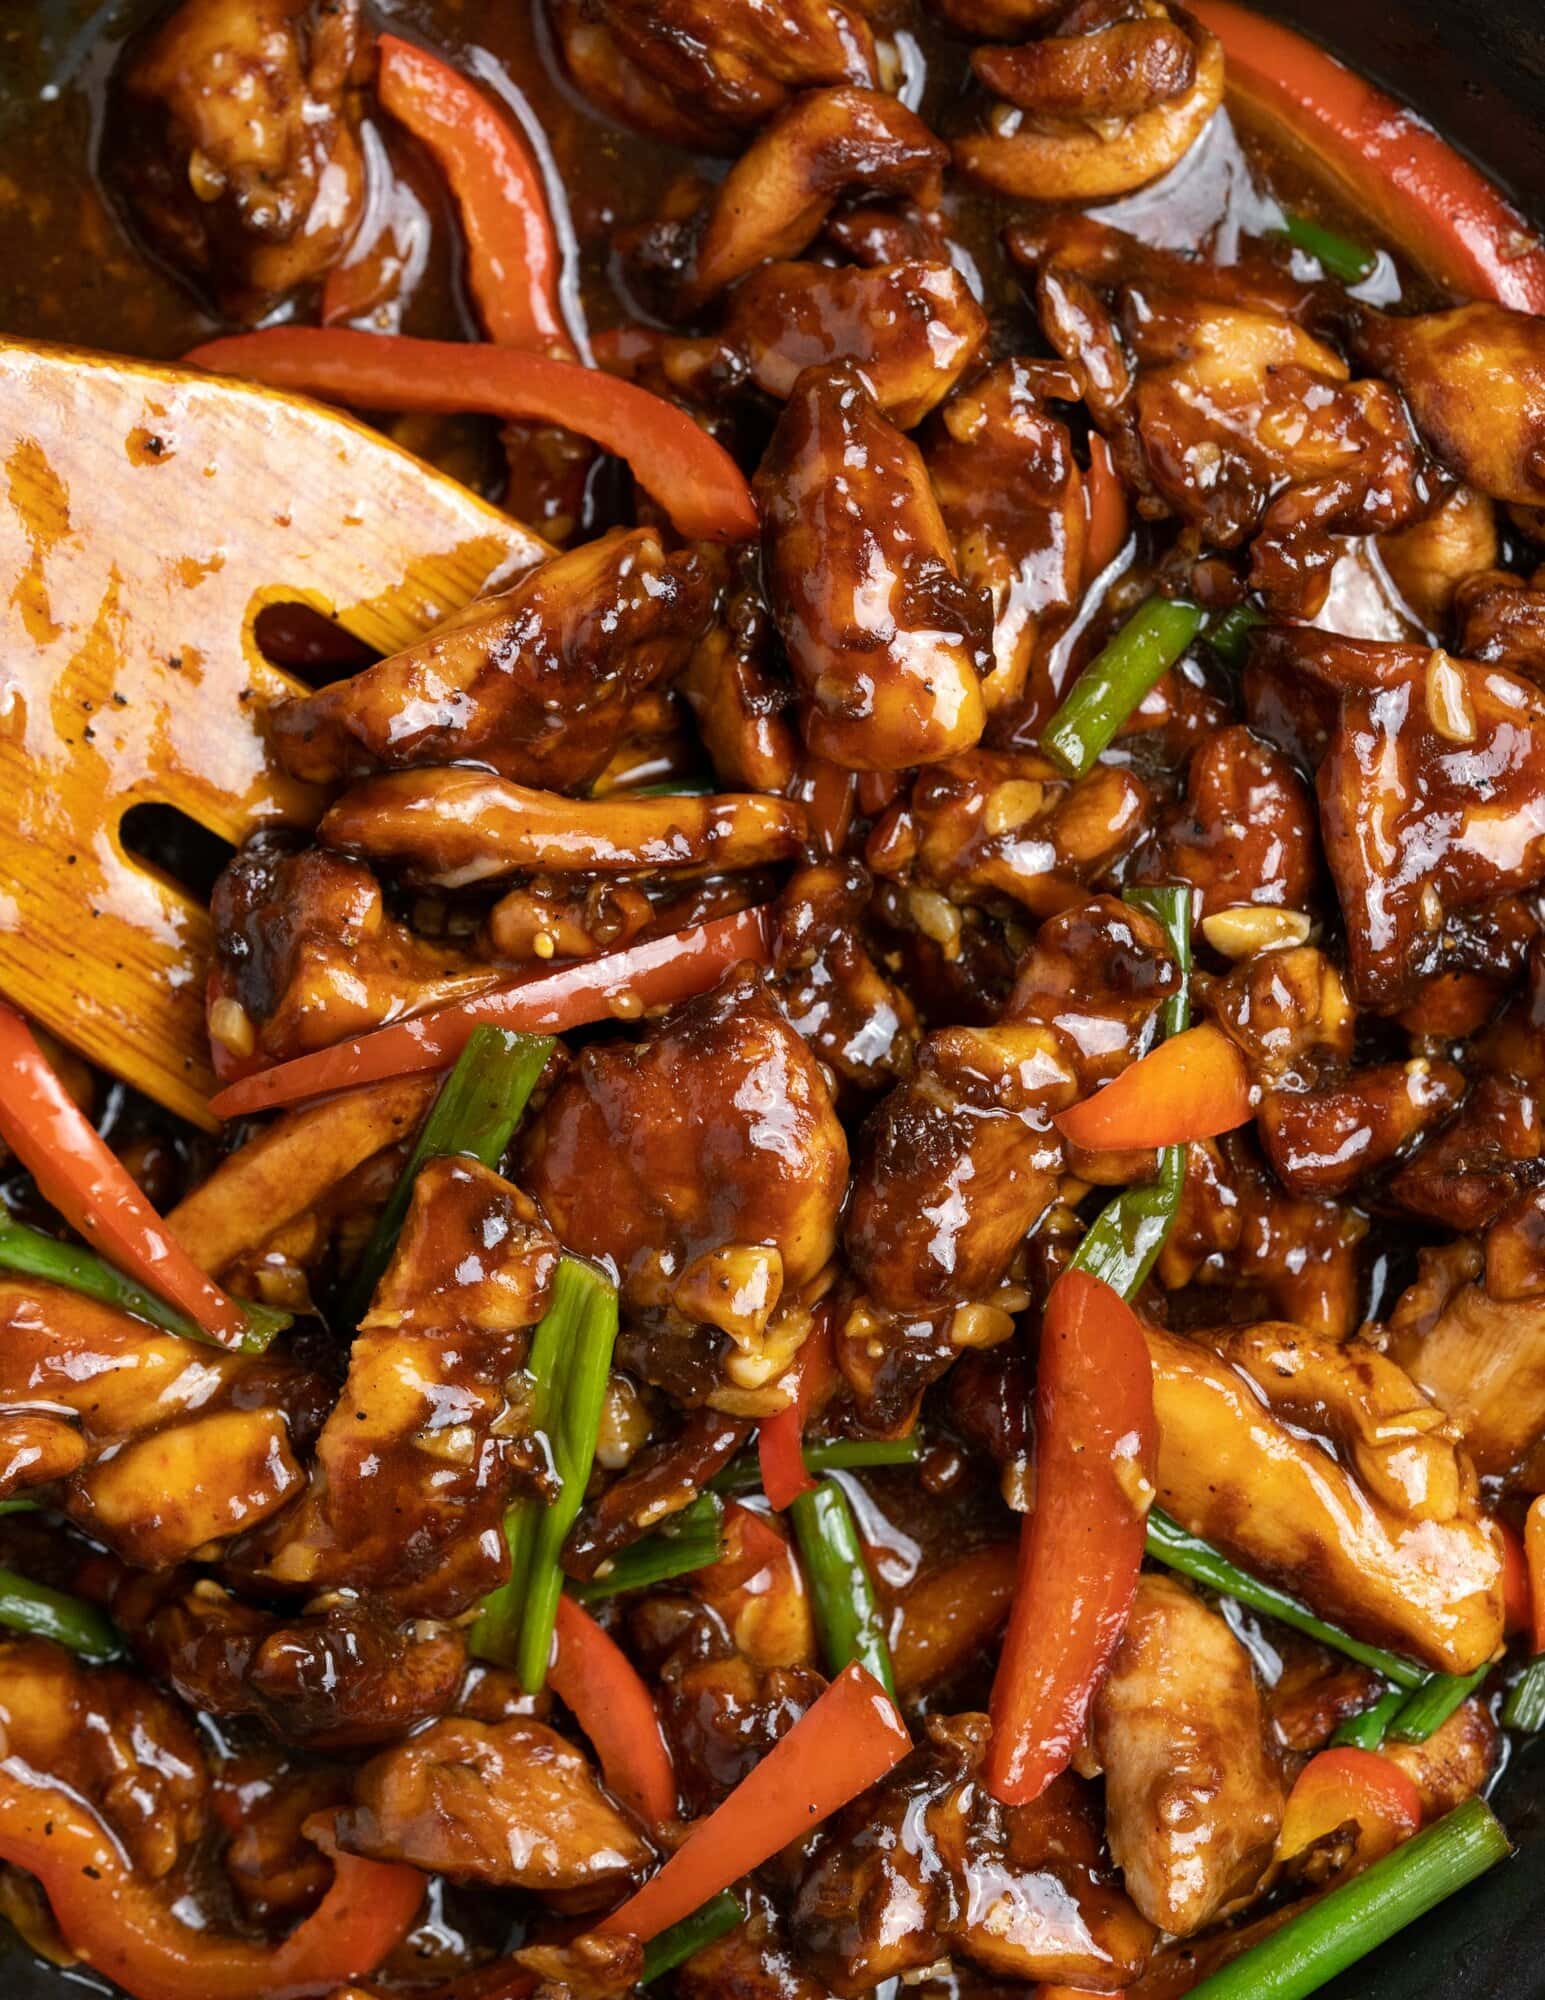 A close-up view of Chinese garlic chicken shows chicken and sliced bell pepper coated with a dark soy-based sauce with flavor intensified by garlic